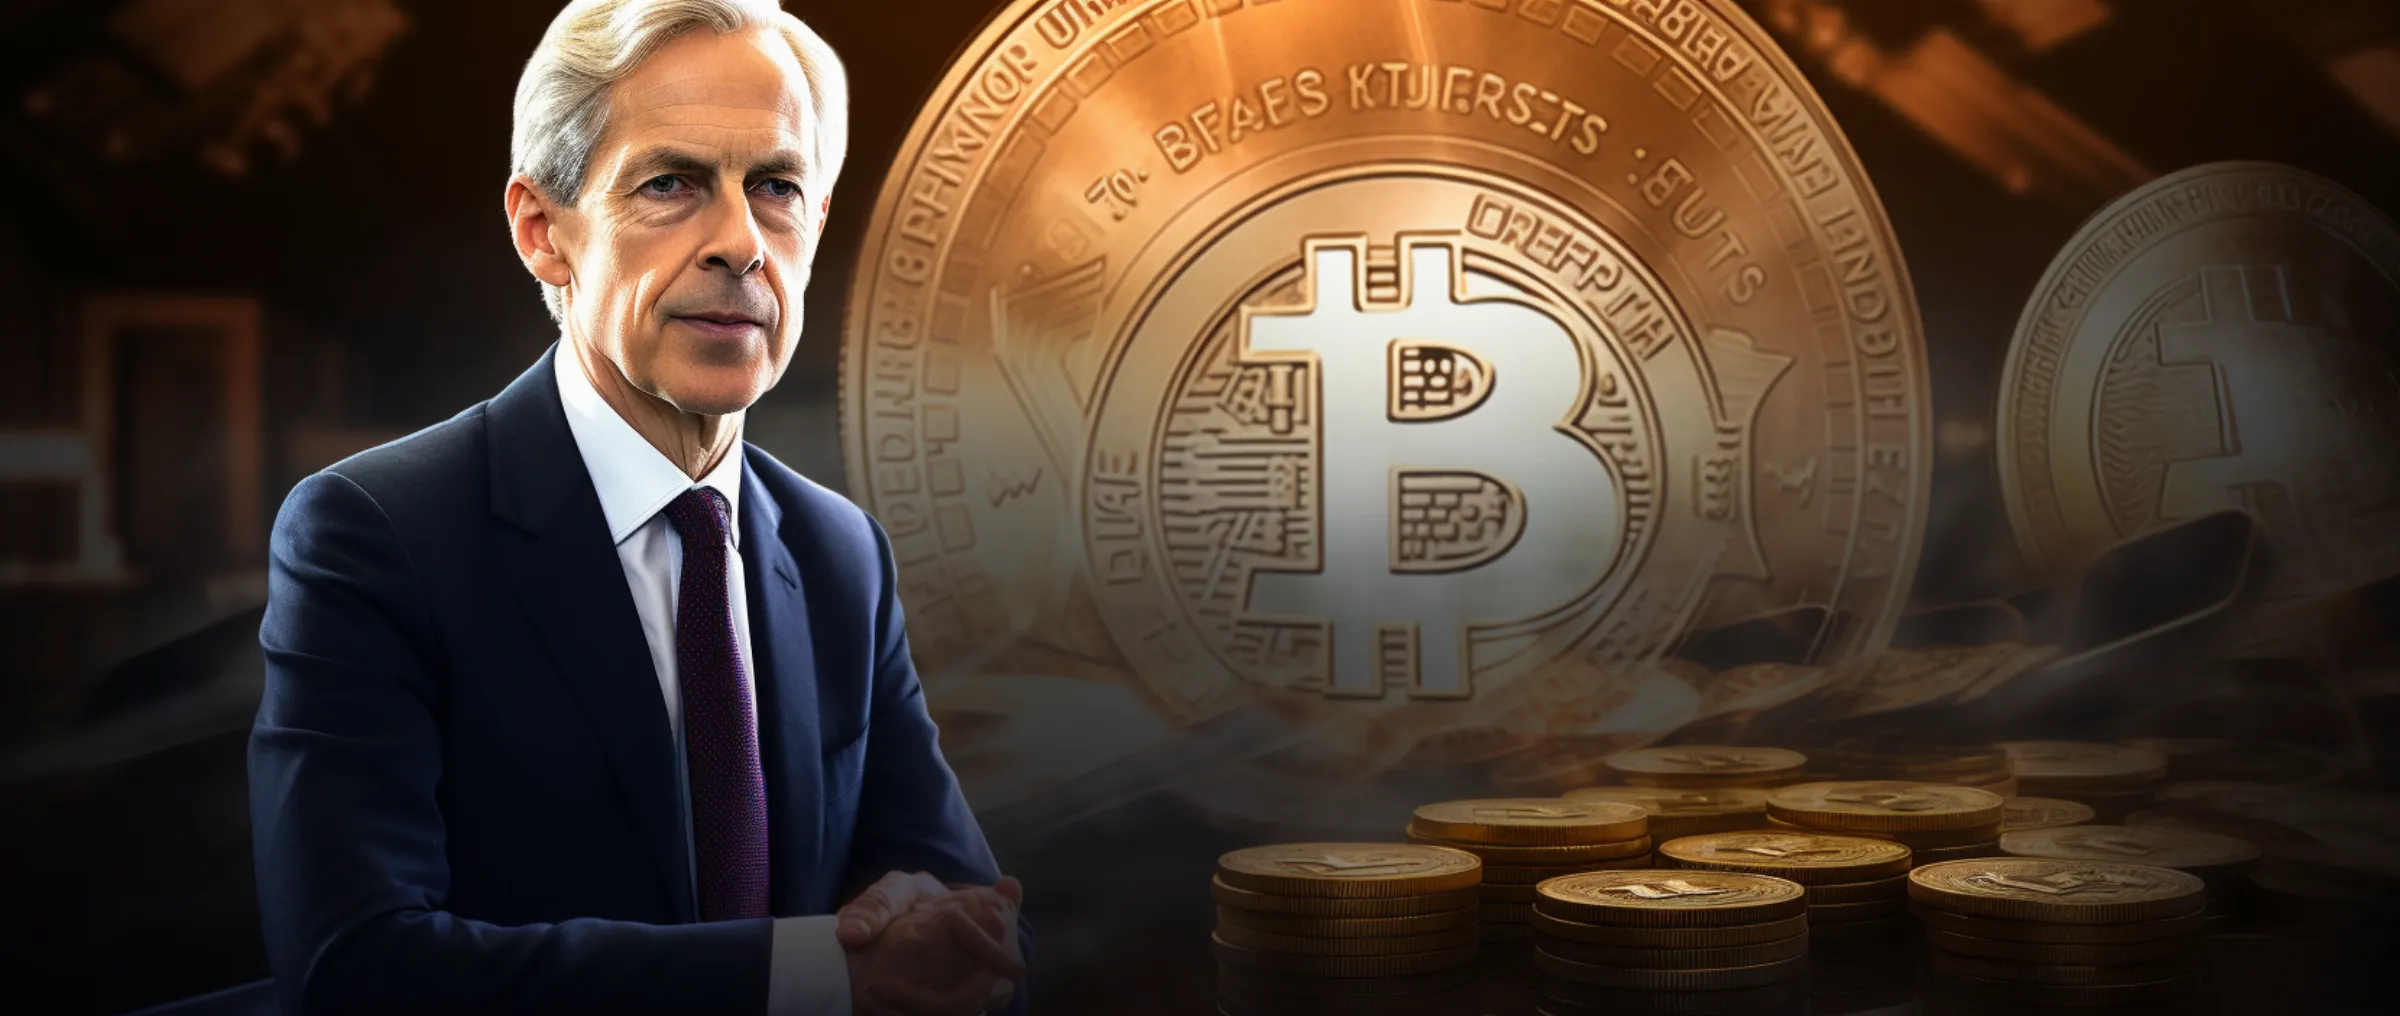 UK finance minister to address cryptocurrency banking concerns